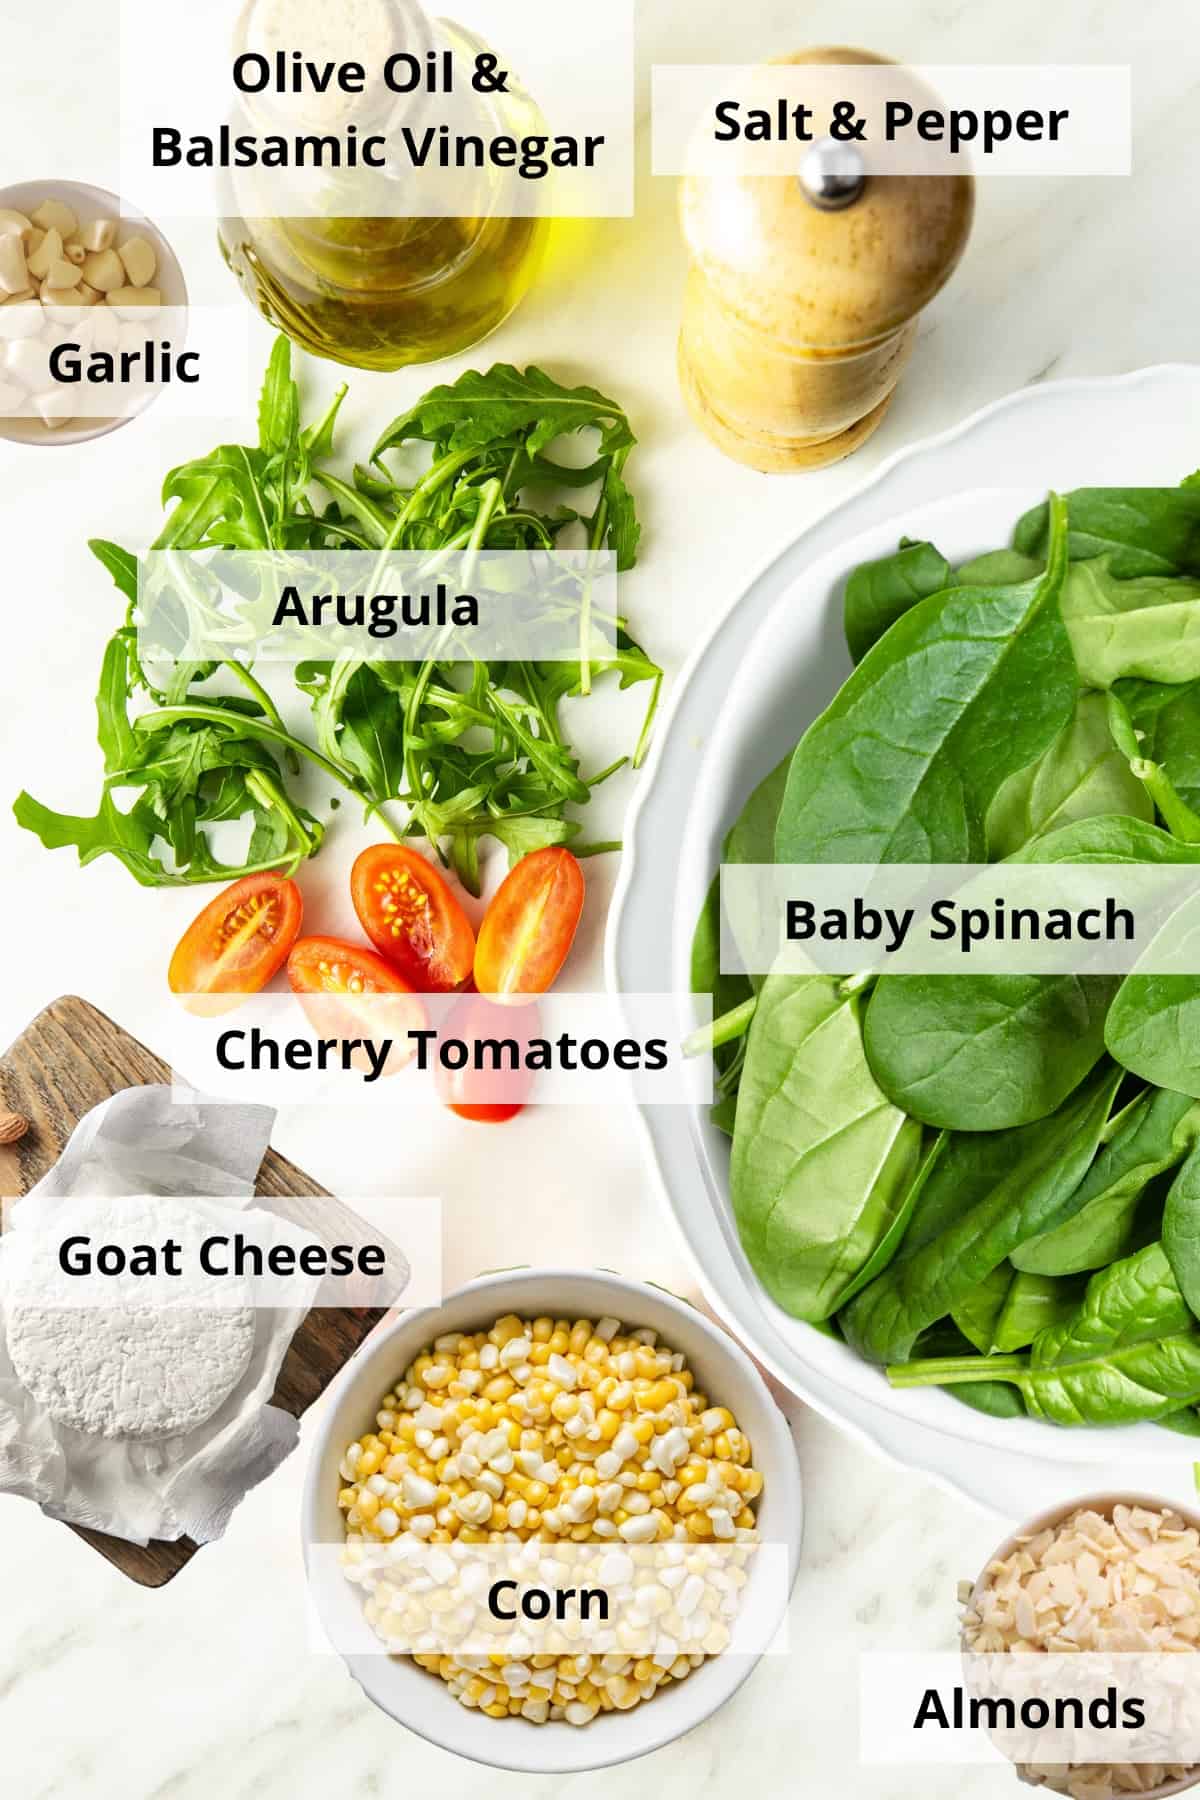 Ingredients for spinach and arugula salad recipe on a white background.